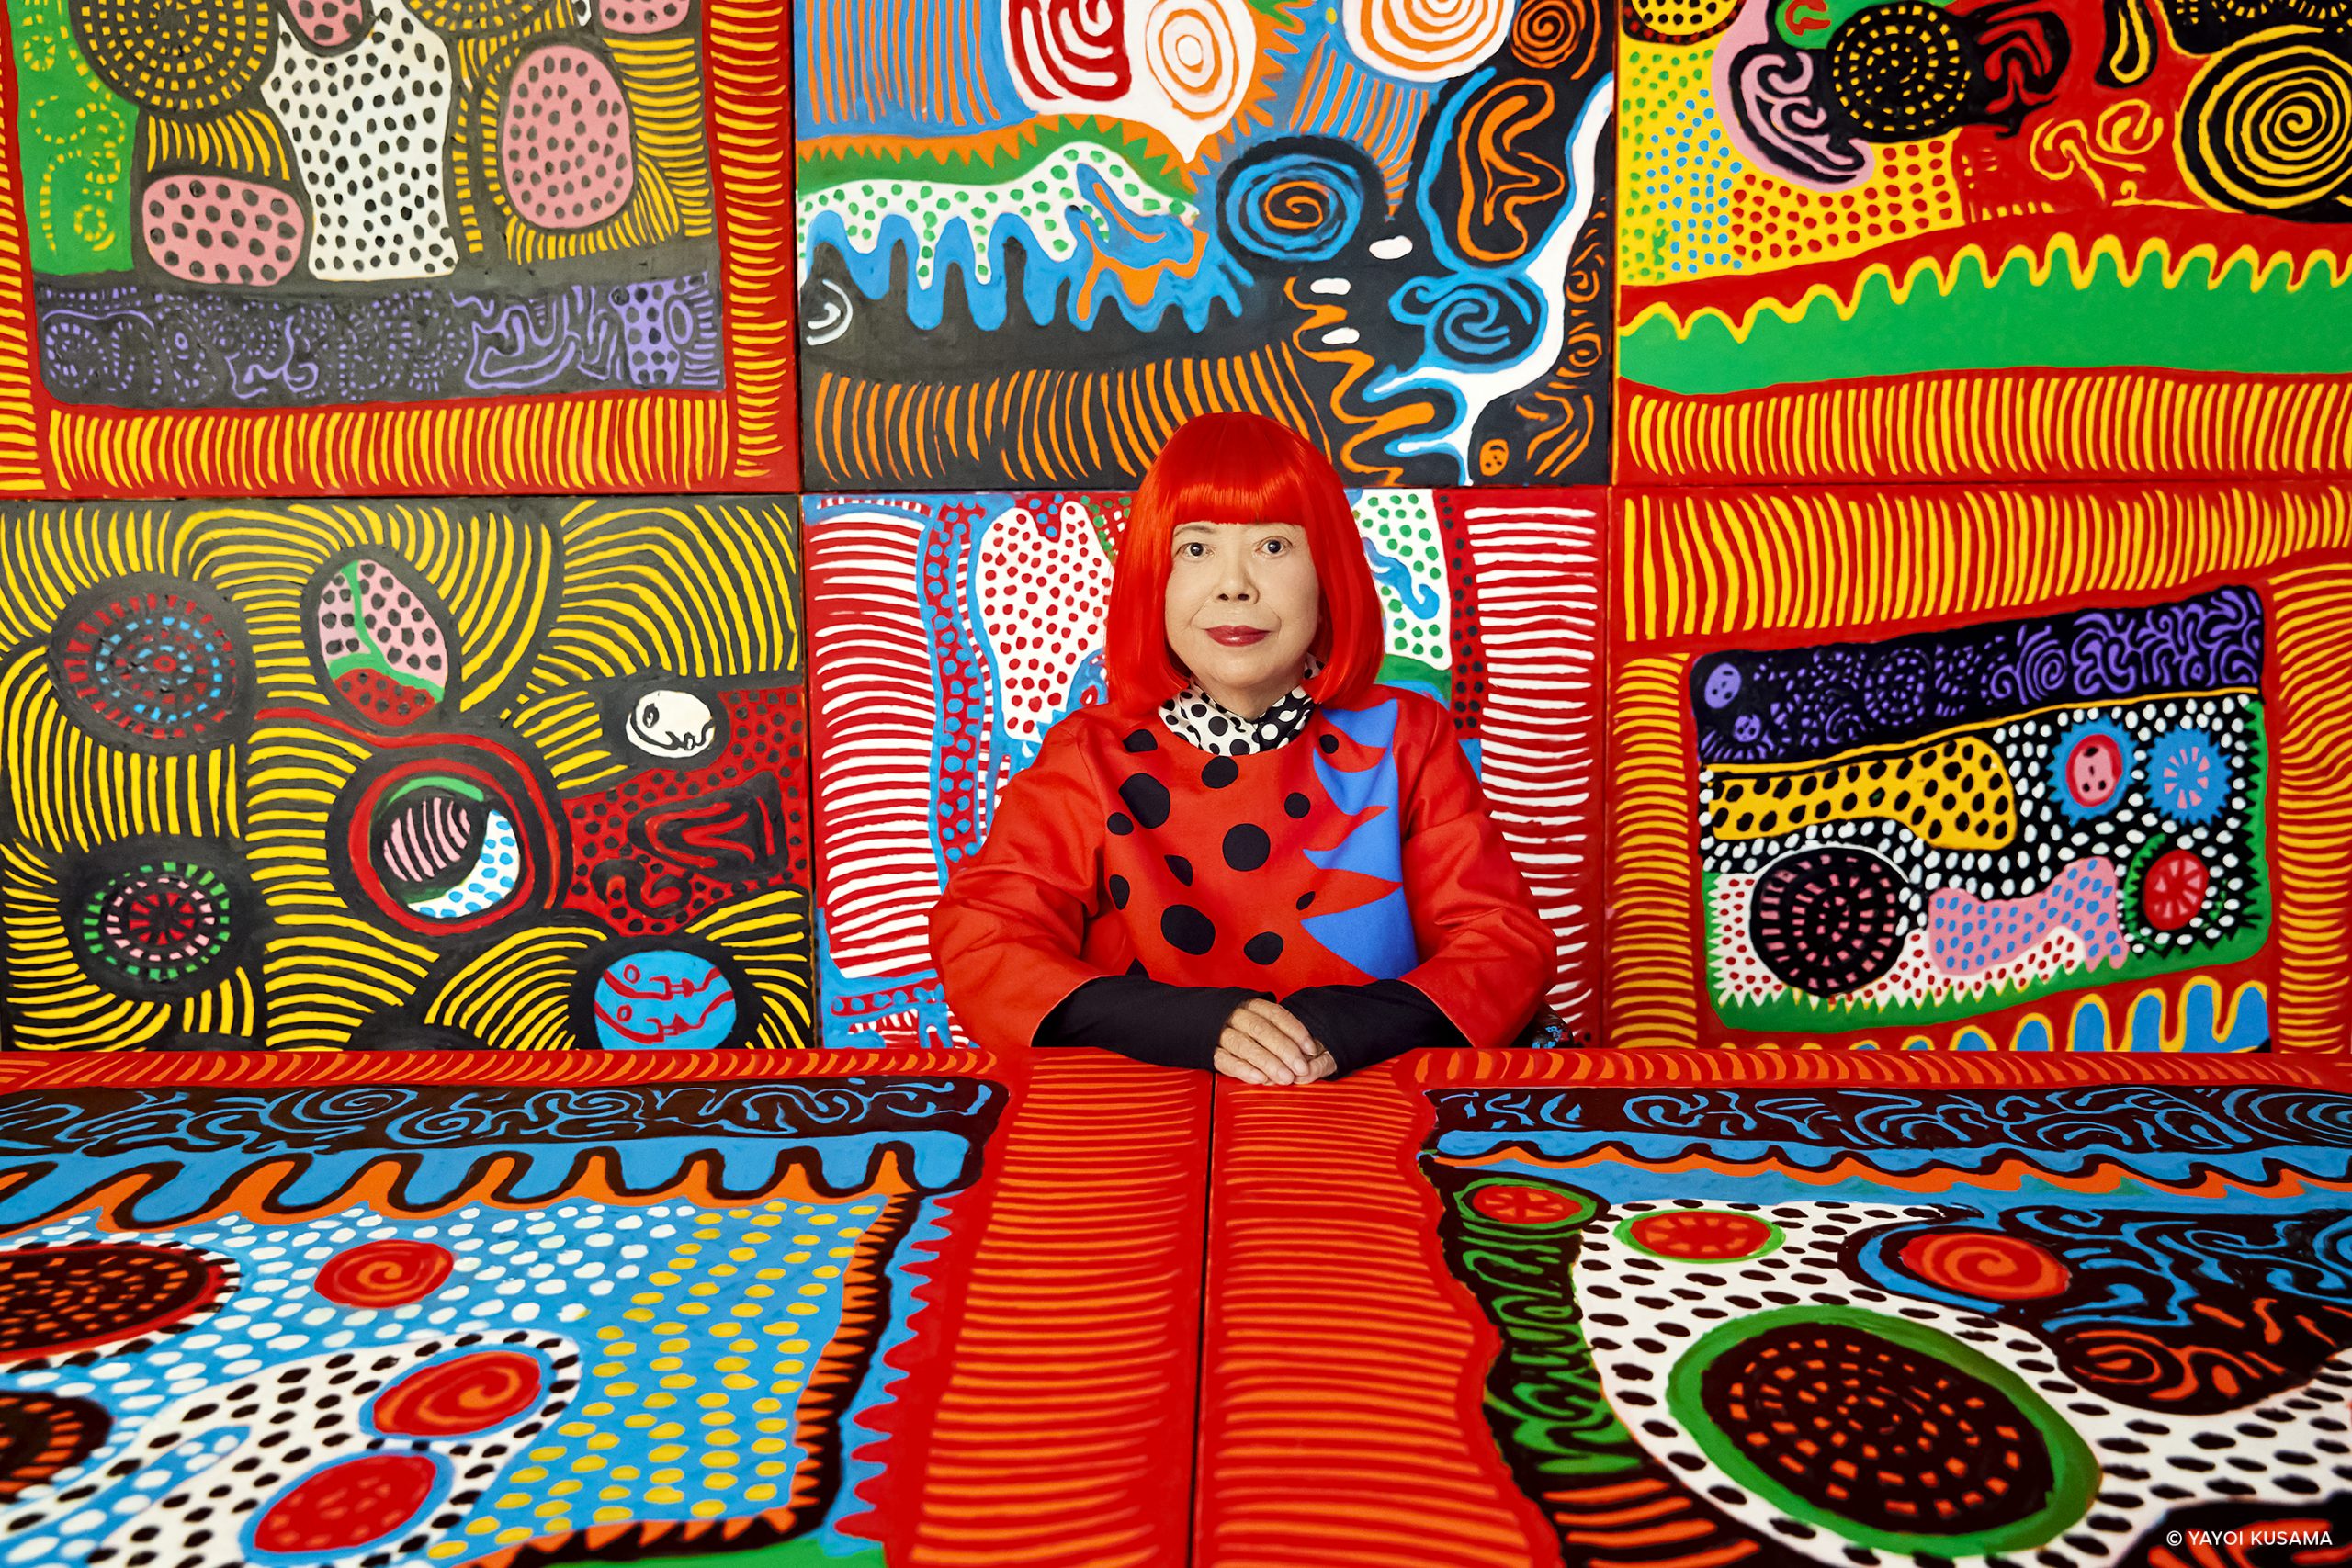 Yayoi Kusama Museum: A Visitor's Guide to Seeing Spots